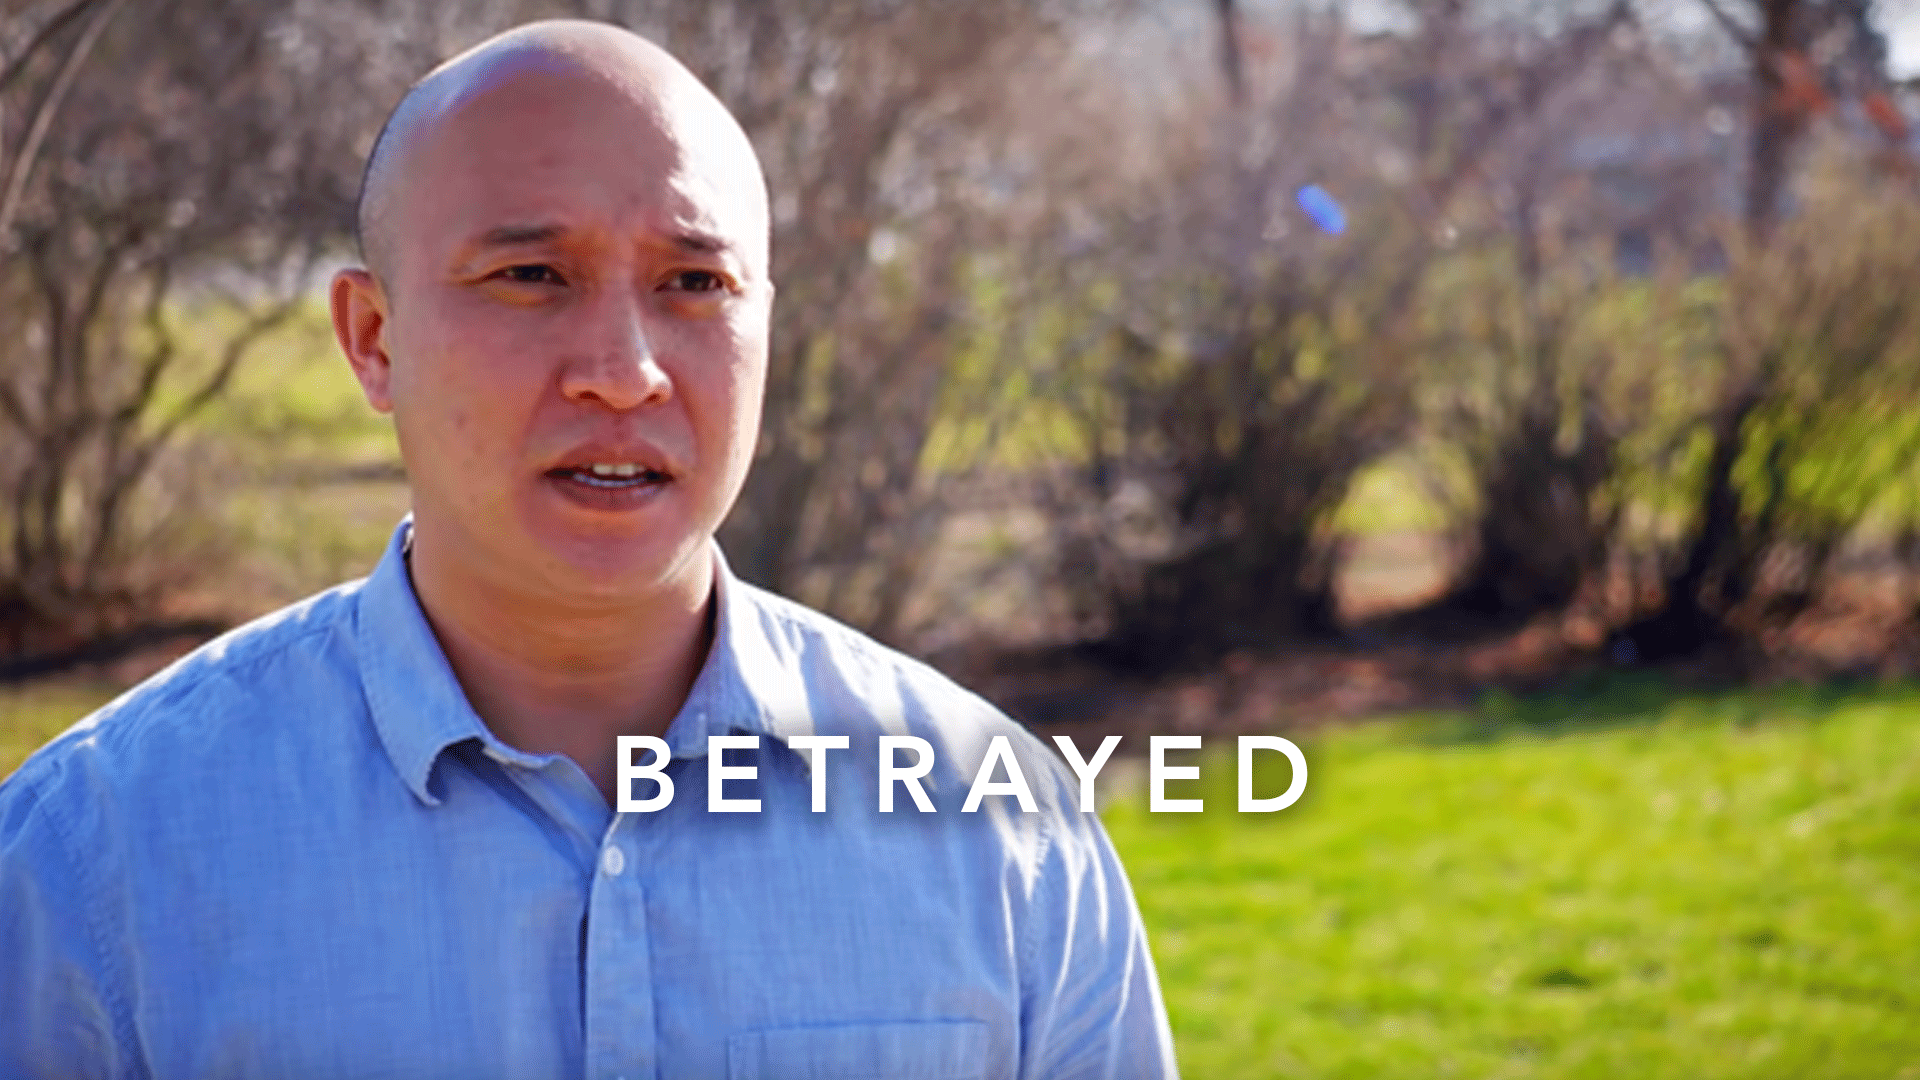 Betrayed | Not as advertised.